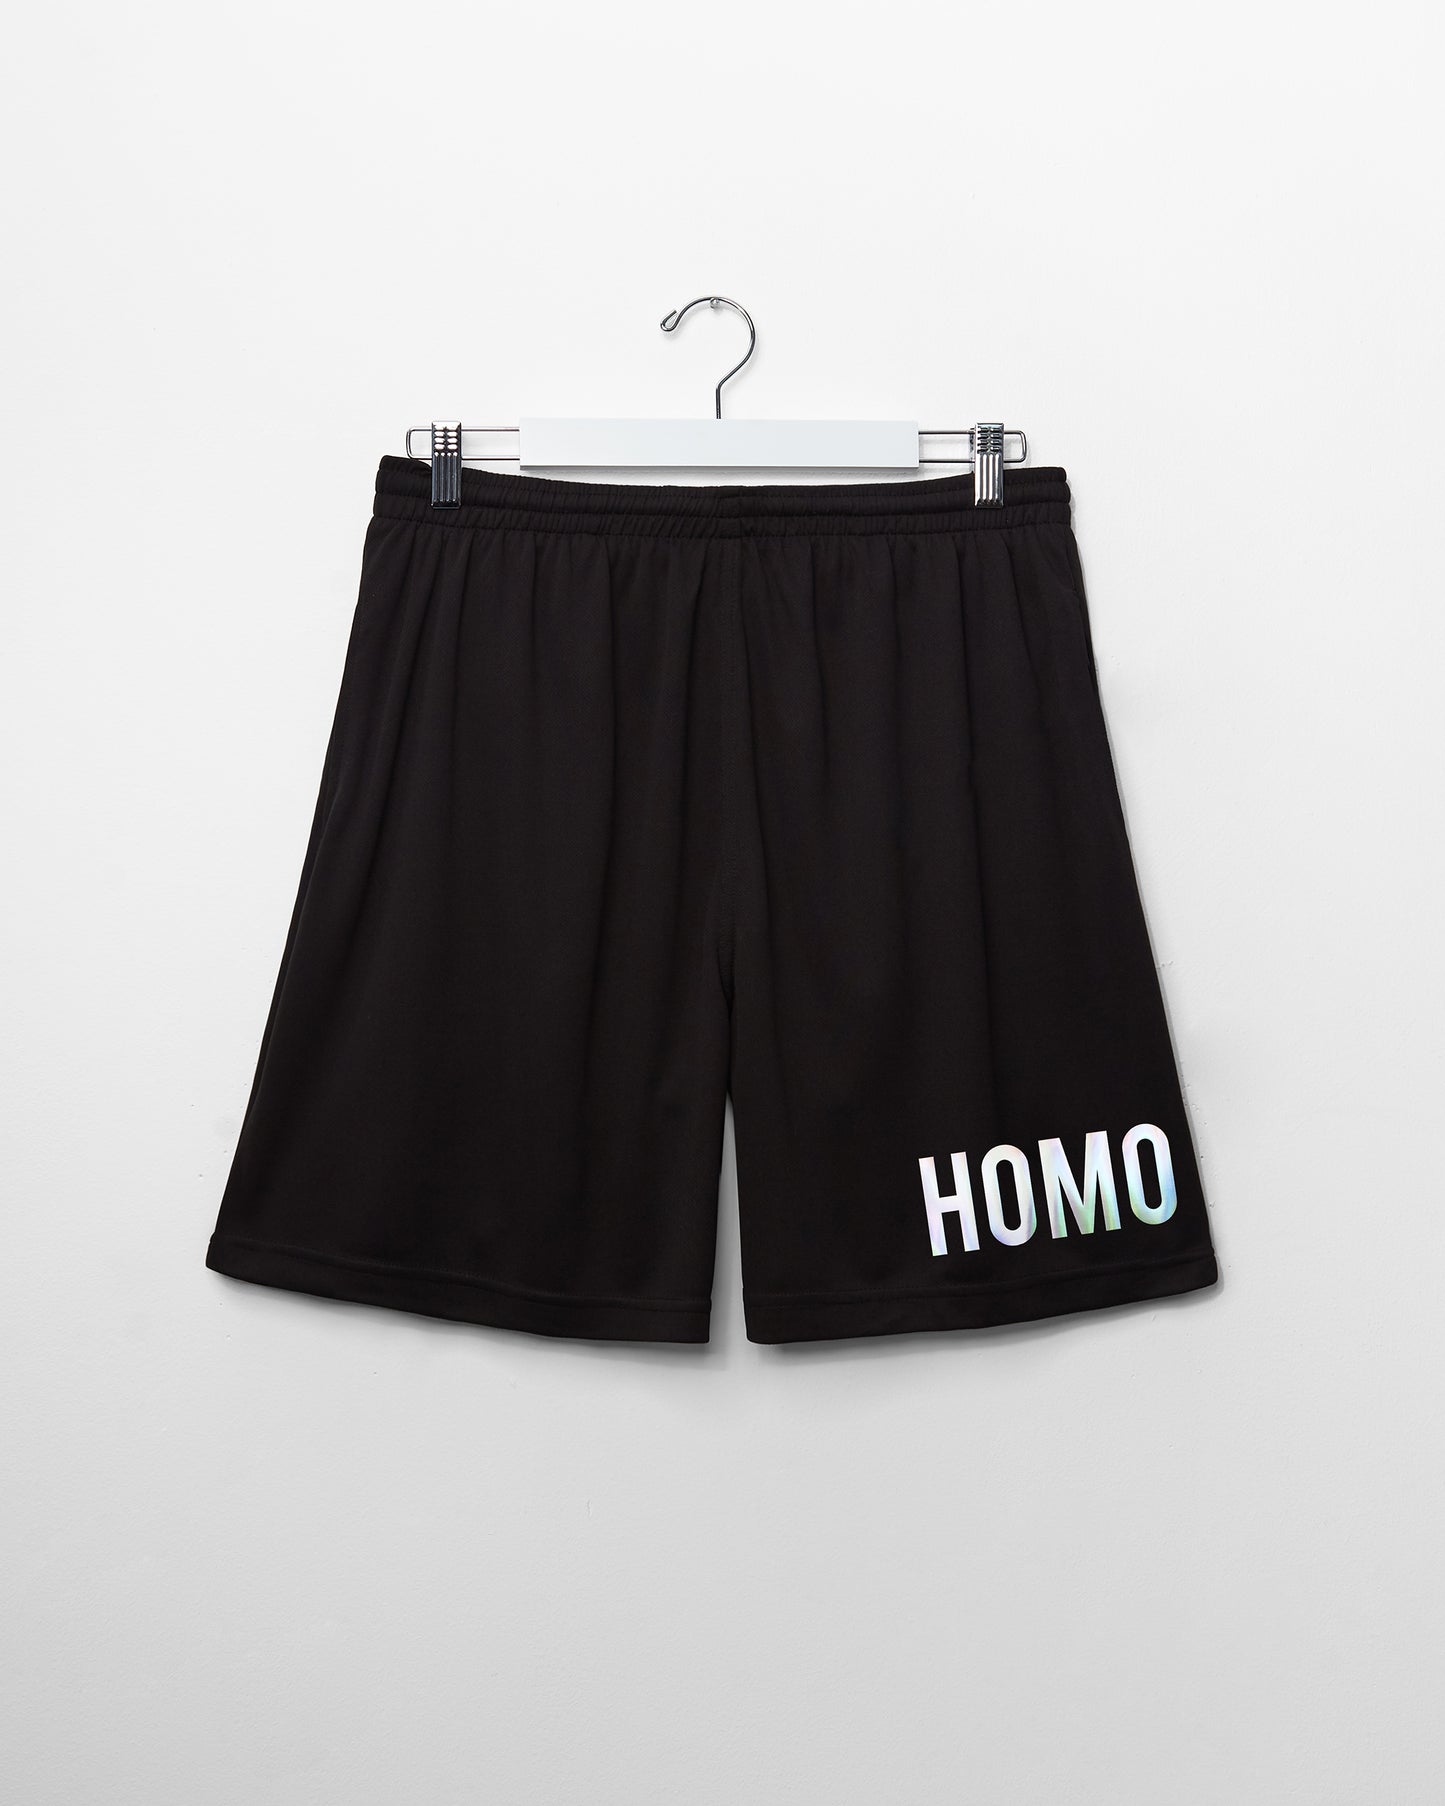 Double pack - HOMO, hologram/black - sideless tee & basketball shorts - full outfit.